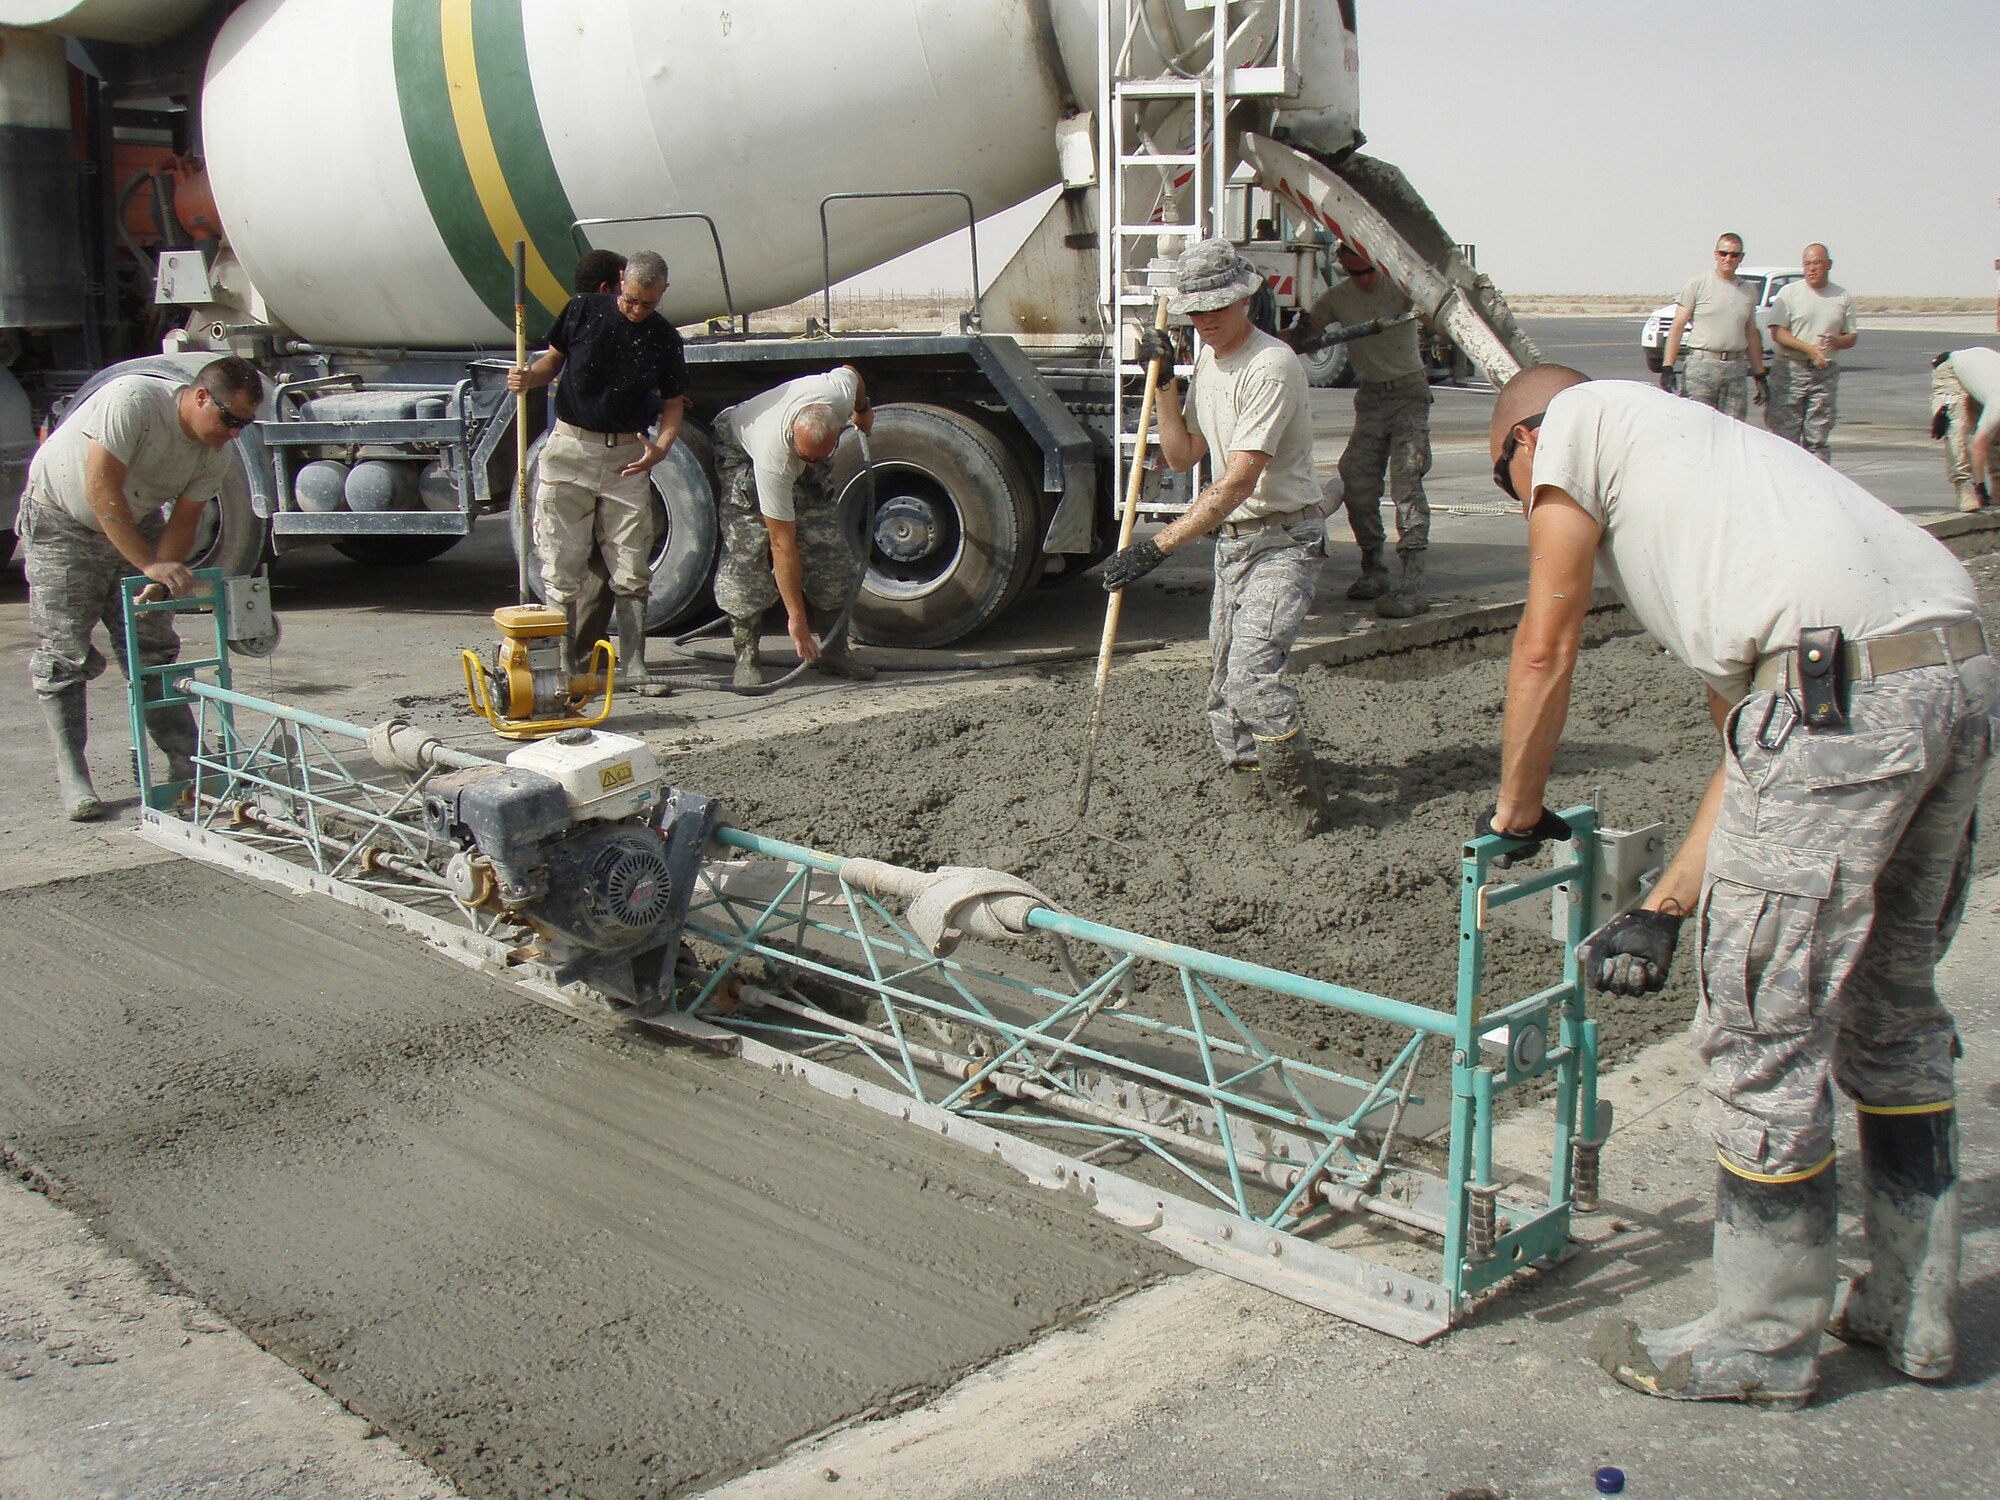 SOUTHWEST ASIA -- Members of the 386th Expeditionary Civil Engineer Squadronlay down concrete during the consruction of a concrete maintenance pad in August at an air base in Southwest Asia. The concrete pad, set to open Sept. 15, will be used a a maintenance area for aircraft mechancis at the 386th Air Expeditionary Wing. More concrete pads are expected to be constructed in the future. (U.S. Air Force cortesy photo) 